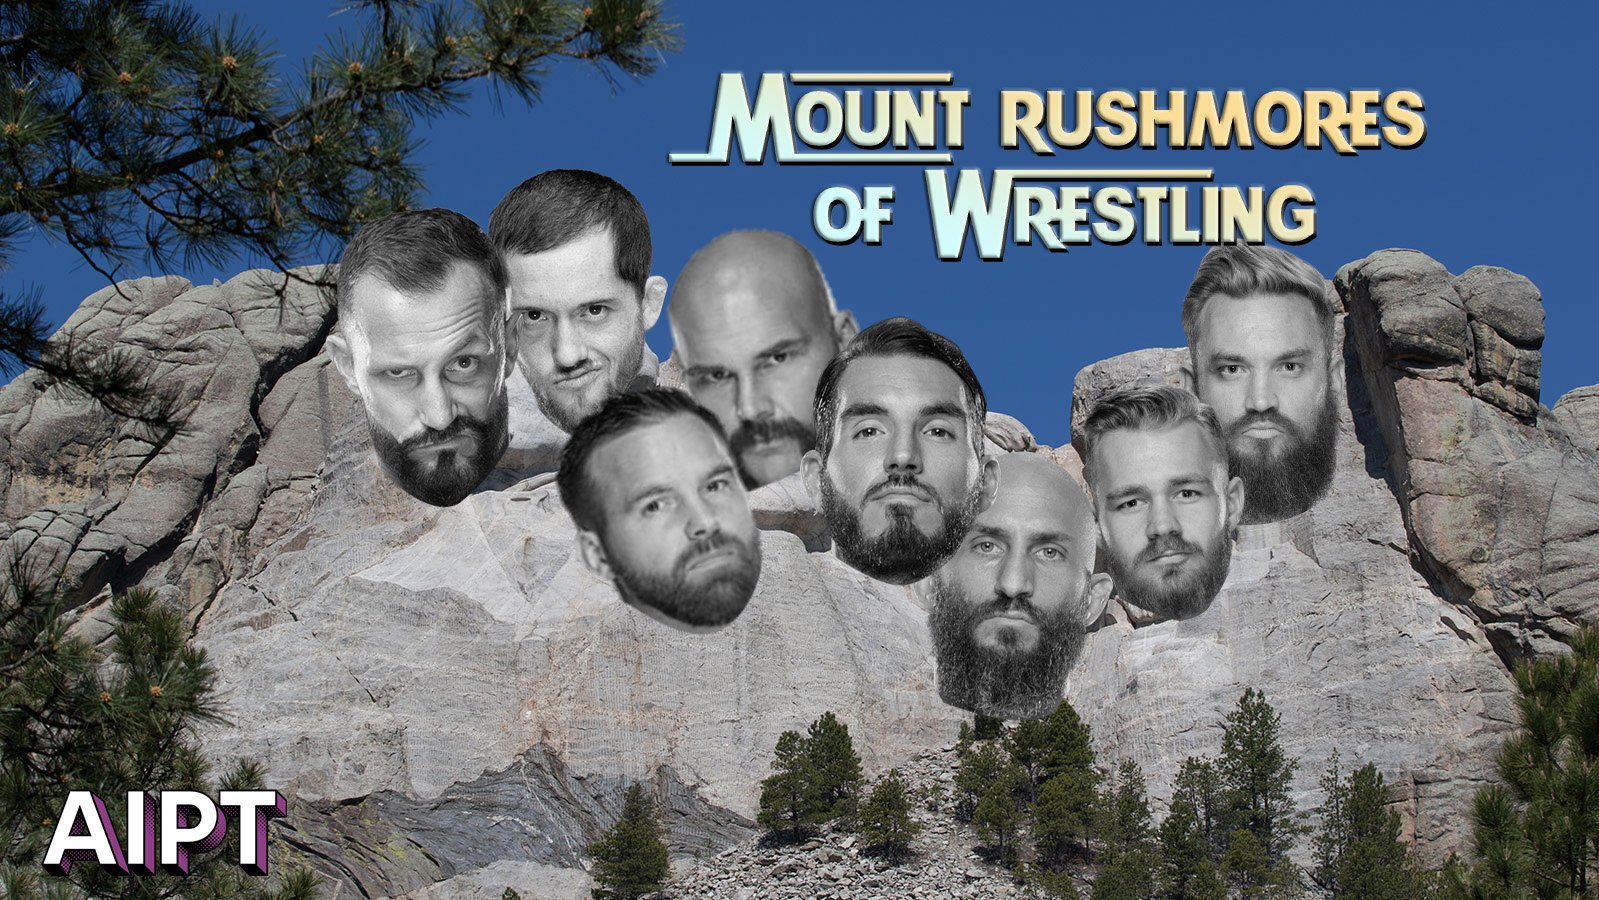 Mt. Rushmores of Wrestling: NXT tag team matches